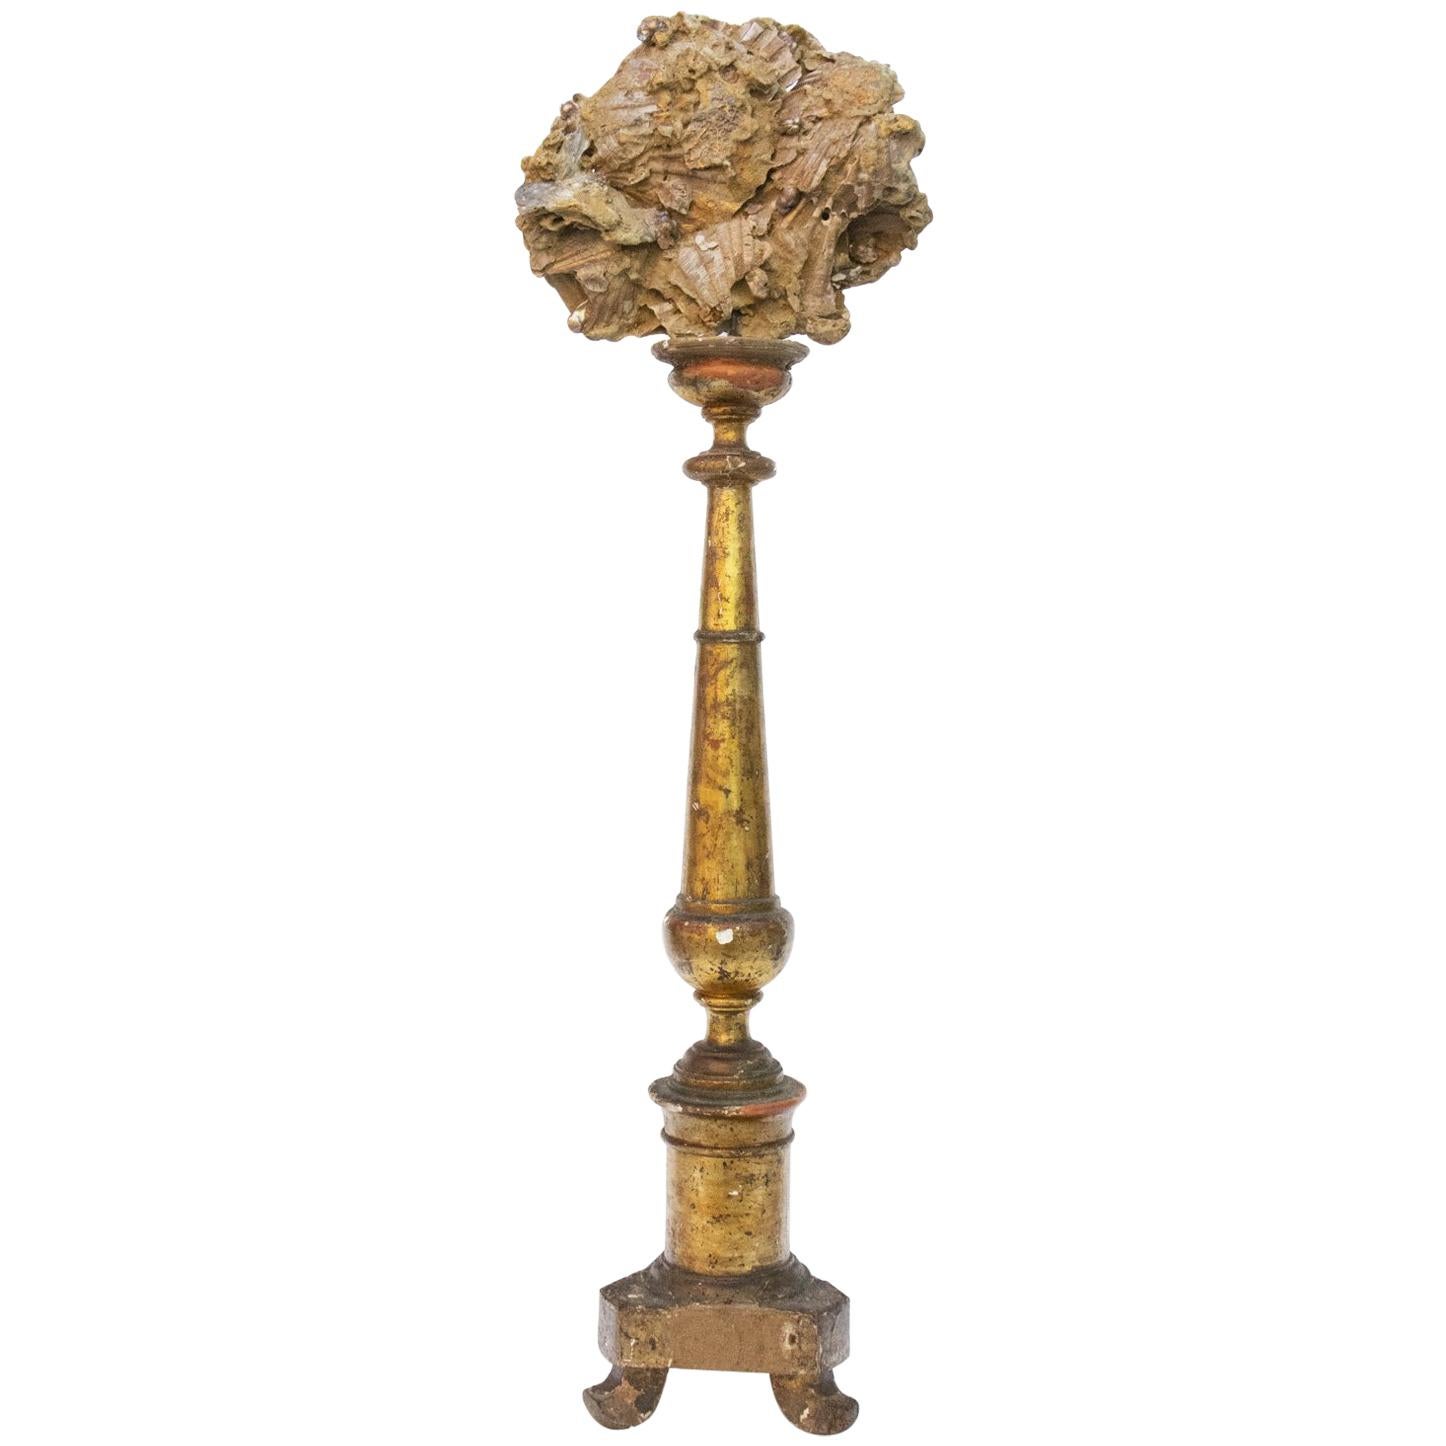 18th Century Italian Altar Stick with a Chesapecten Fossil Scallop Shell & Pearl